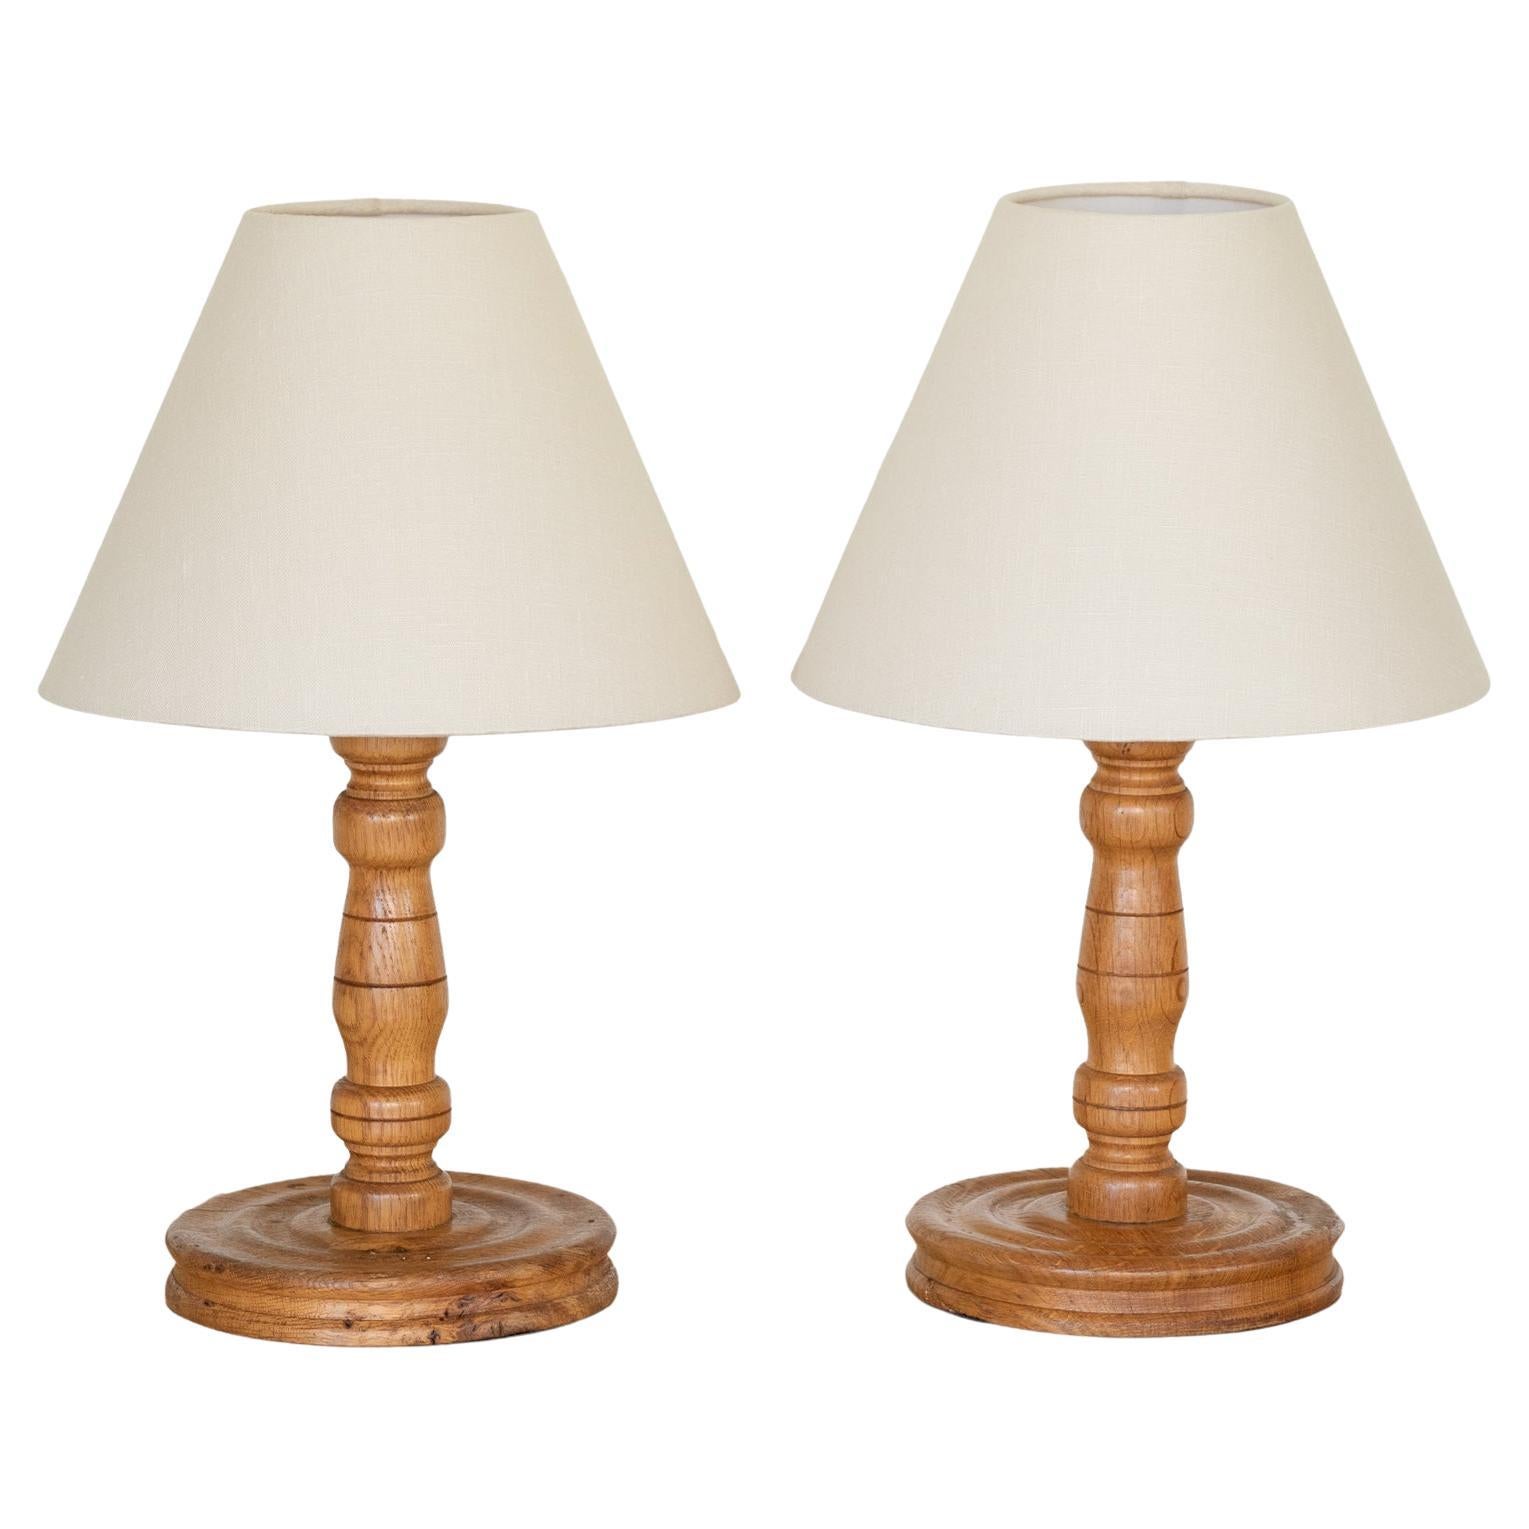 Pair of French Light Turned Wood Lamps